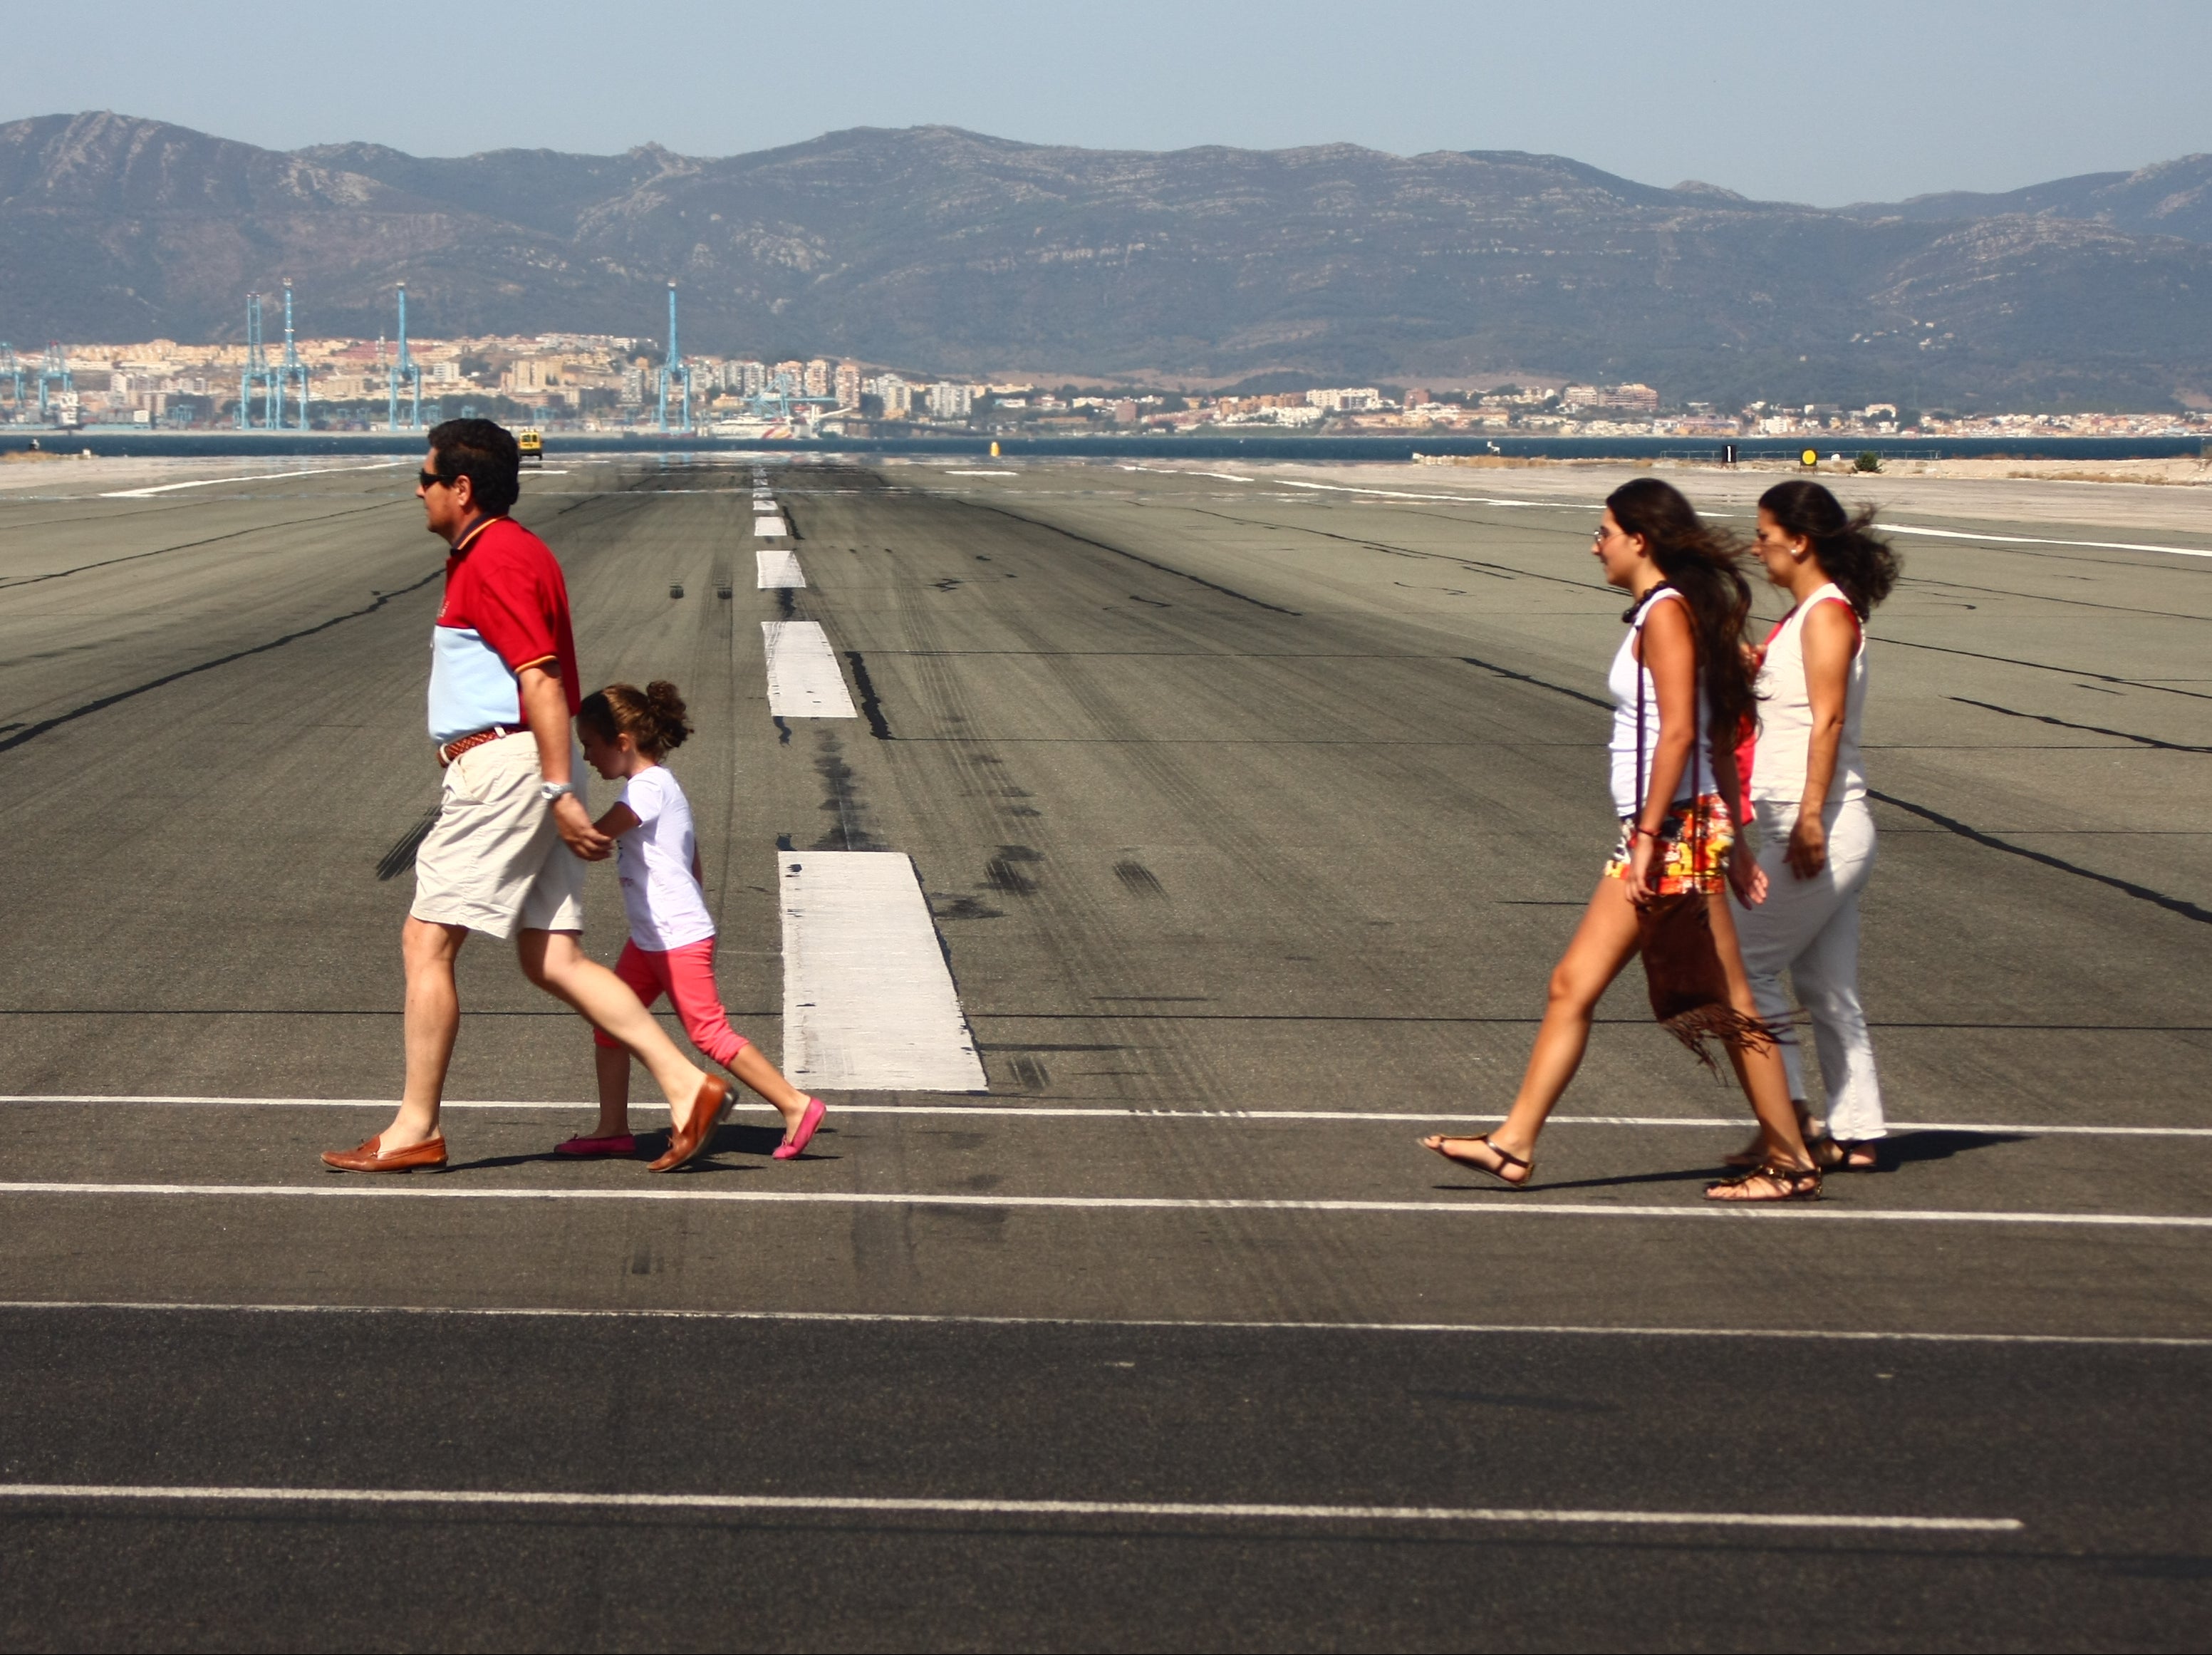 On track: pedestrians walking across the runway at Gibraltar, which is part of the main road into the British Overseas Territory